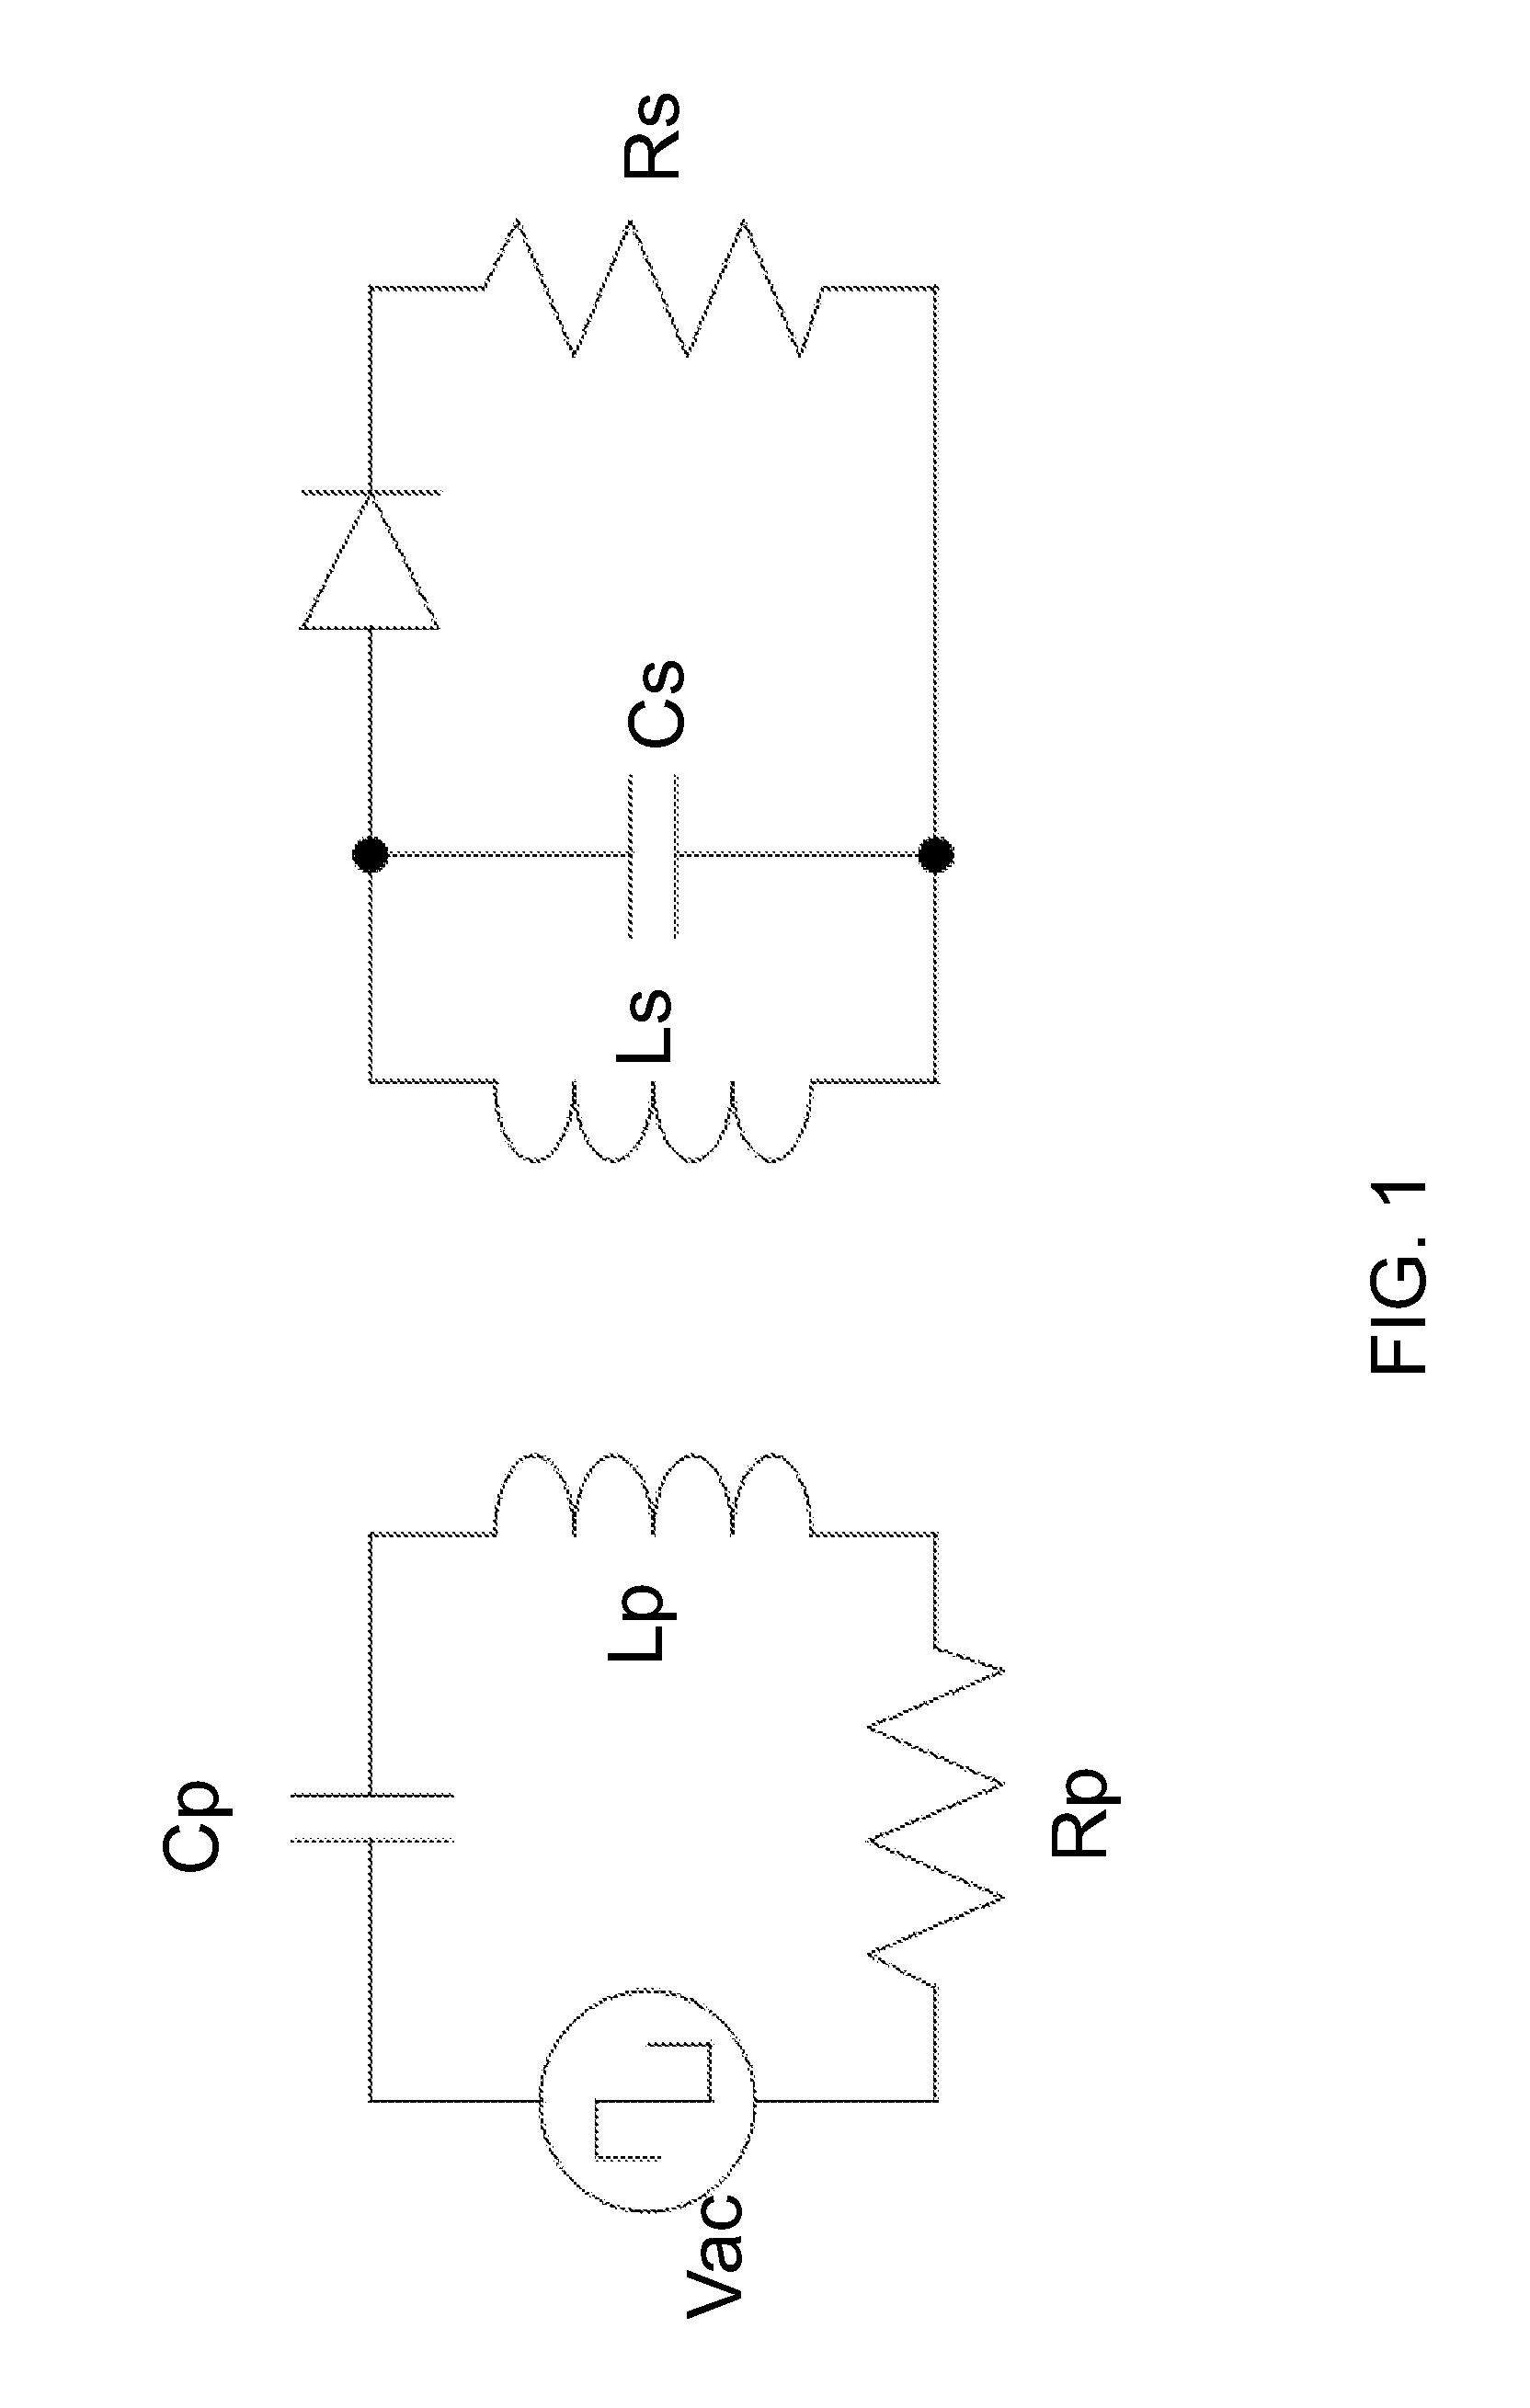 Off-resonance frequency operation for power transfer in a loosely coupled air core transformer